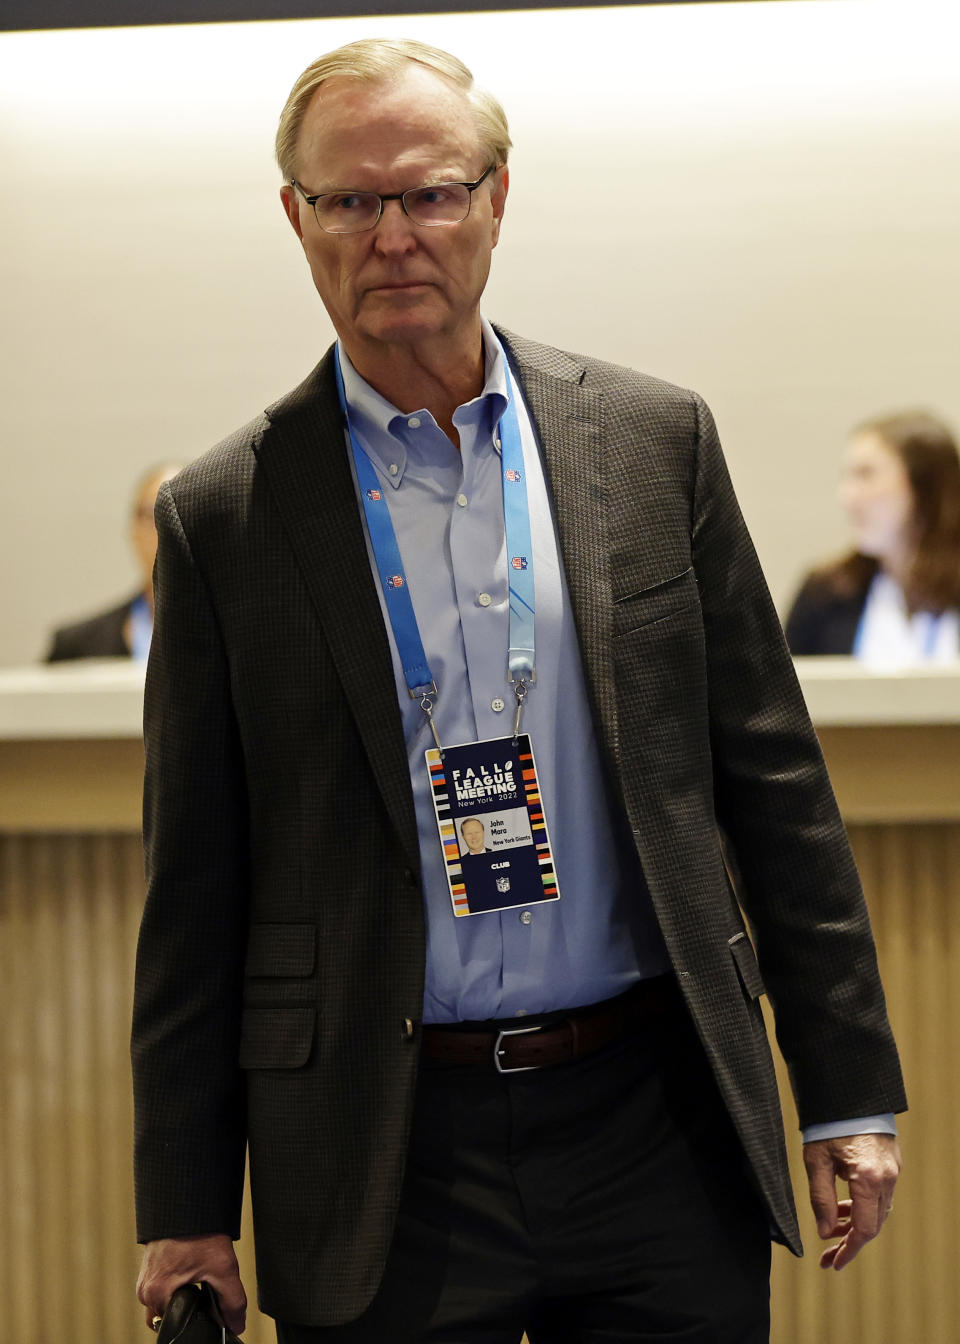 New York Giants owner John Mara arrives for the NFL football owners meeting Tuesday, Oct. 18, 2022, in New York.(AP Photo/Adam Hunger)